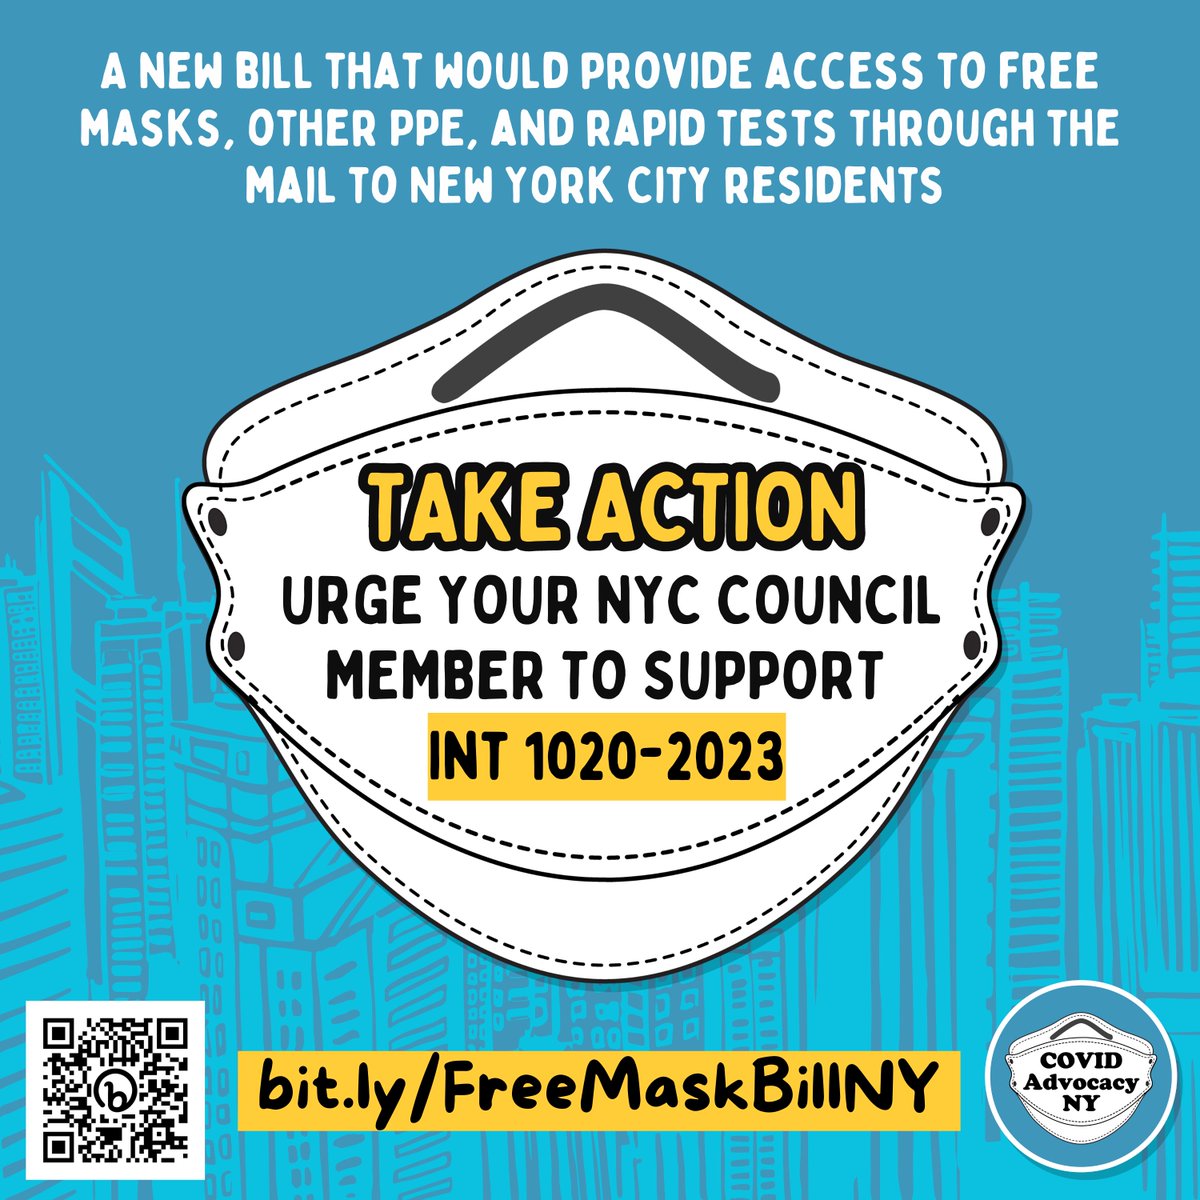 🚨 ACTION ALERT: There's an important new bill that would provide access to free masks, other PPE, & rapid tests through the mail to New York City residents: Int 1020-2023. We need YOUR help to get this bill passed! Contact NYC Council Members: bit.ly/FreeMaskBillNY #FreeN95s